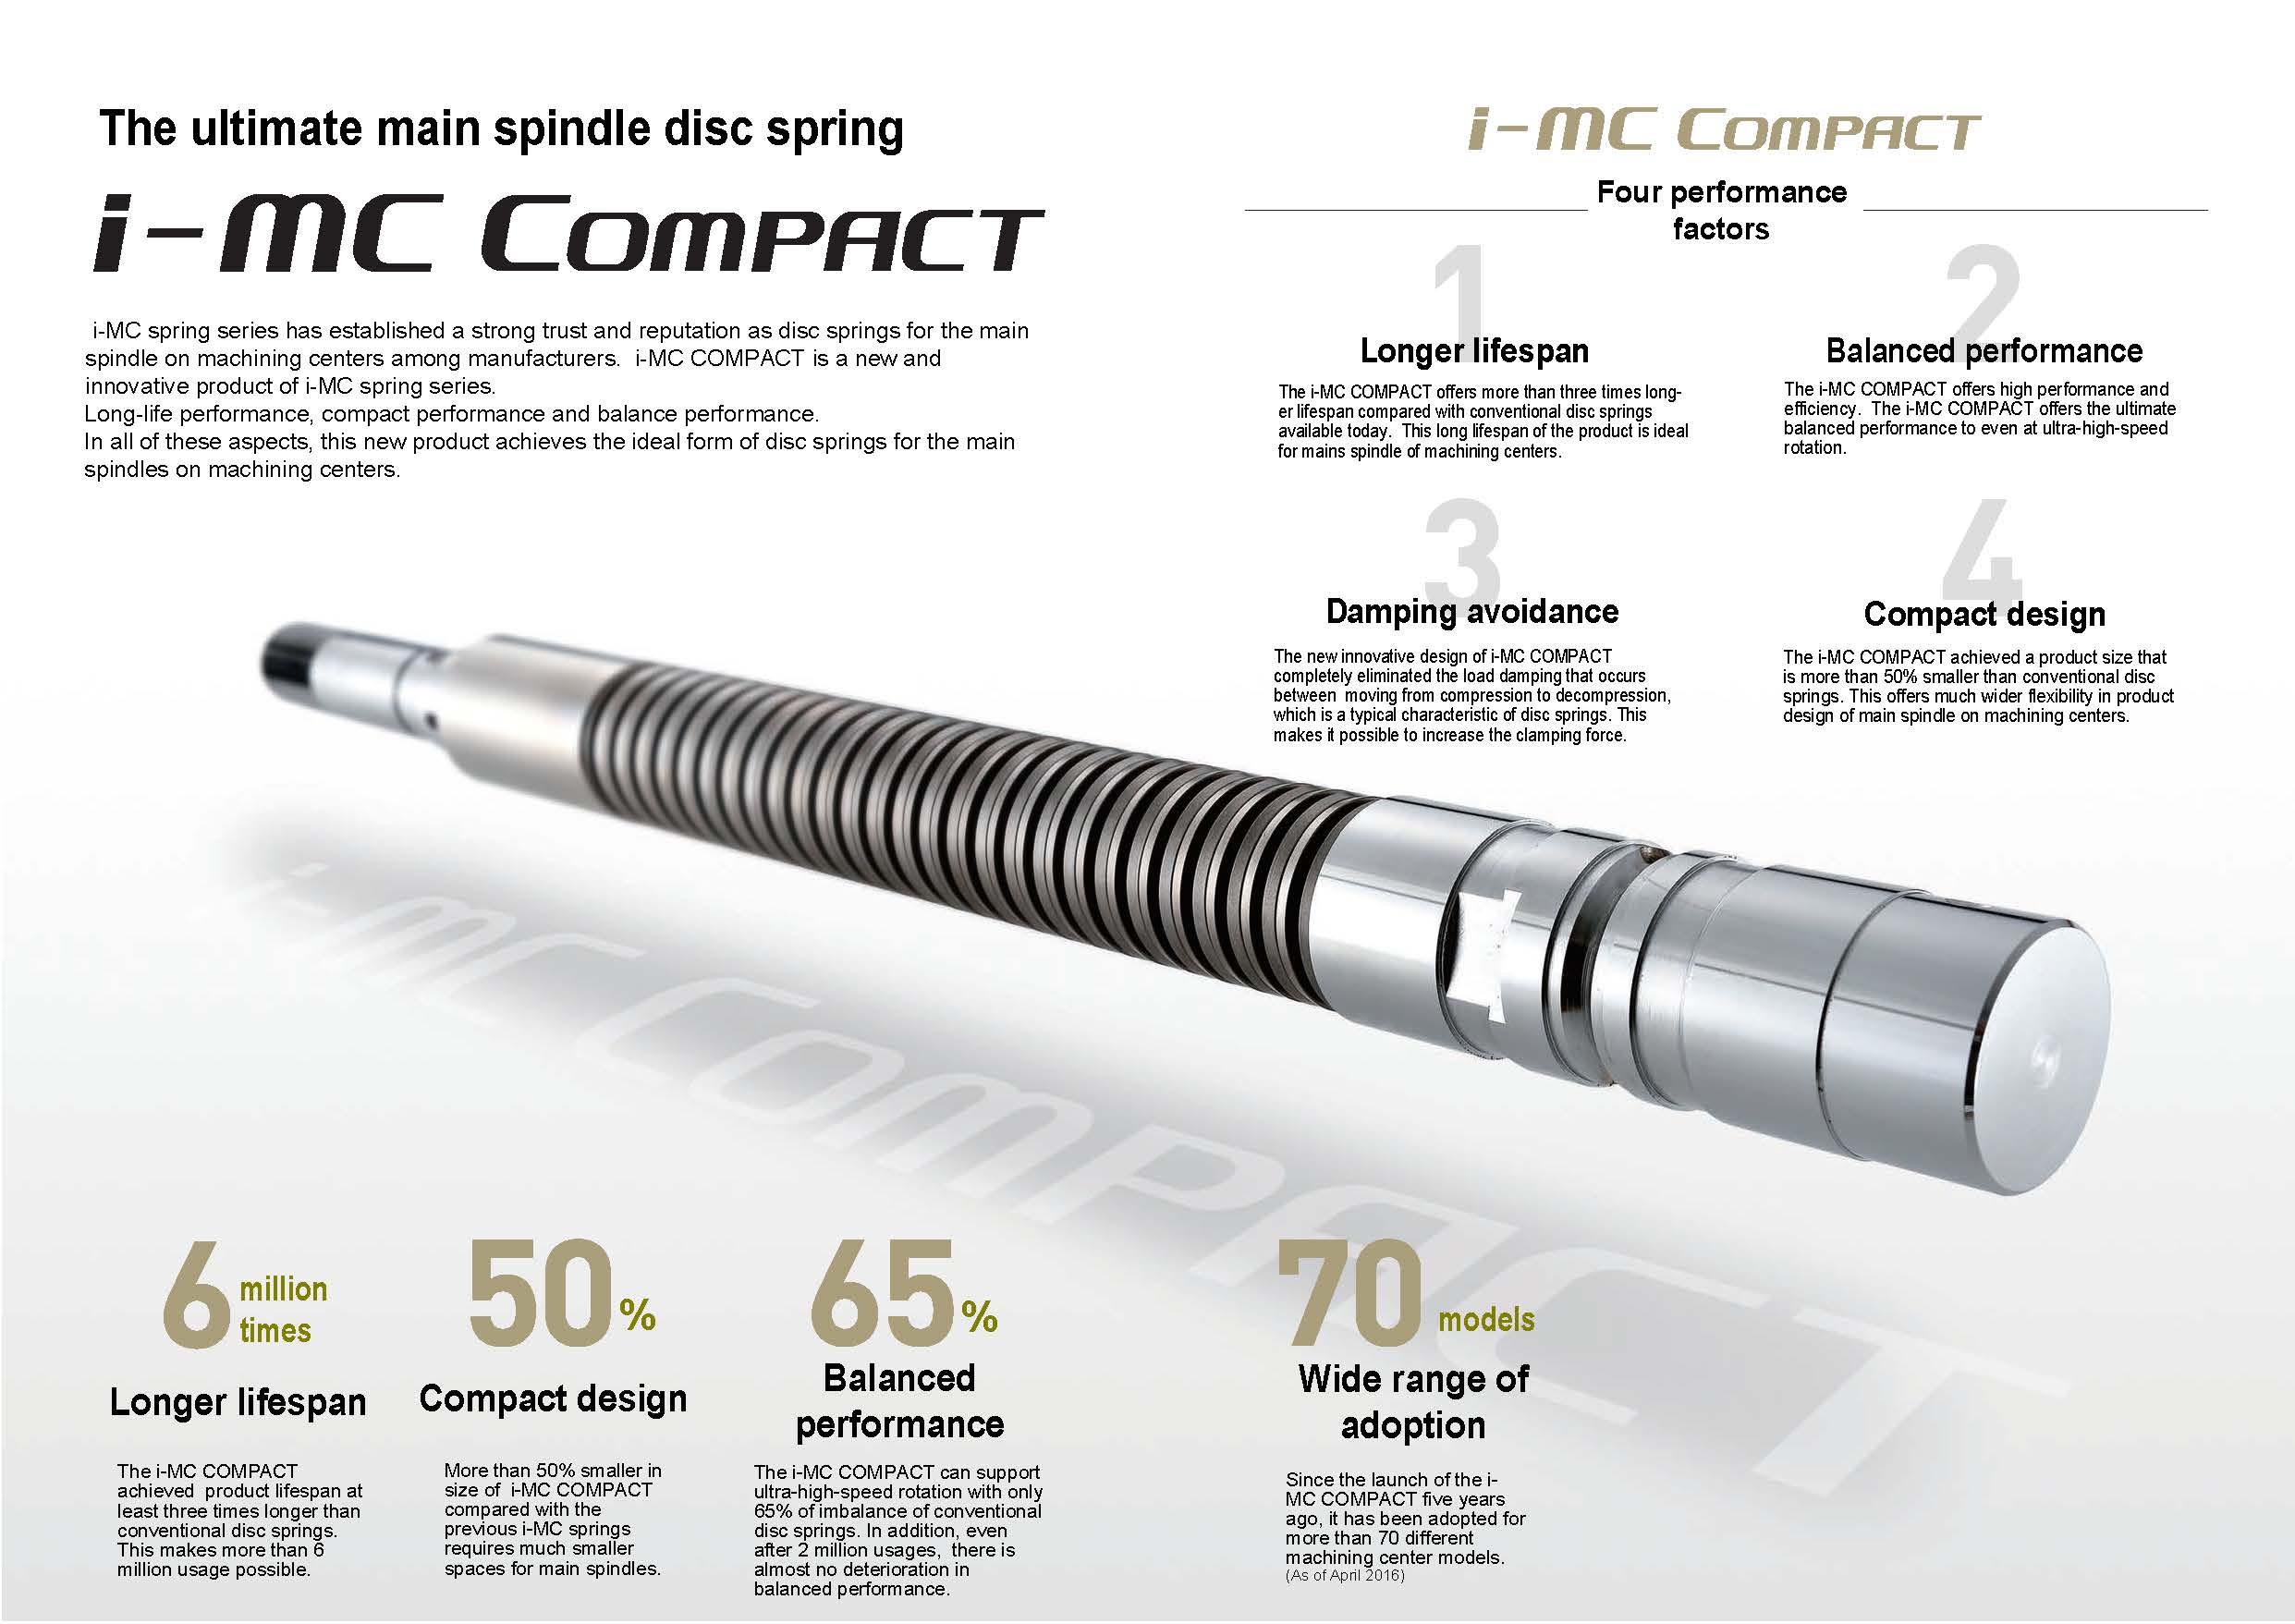 Disc springs for the main spindle on machining centers i-MC COMPACT